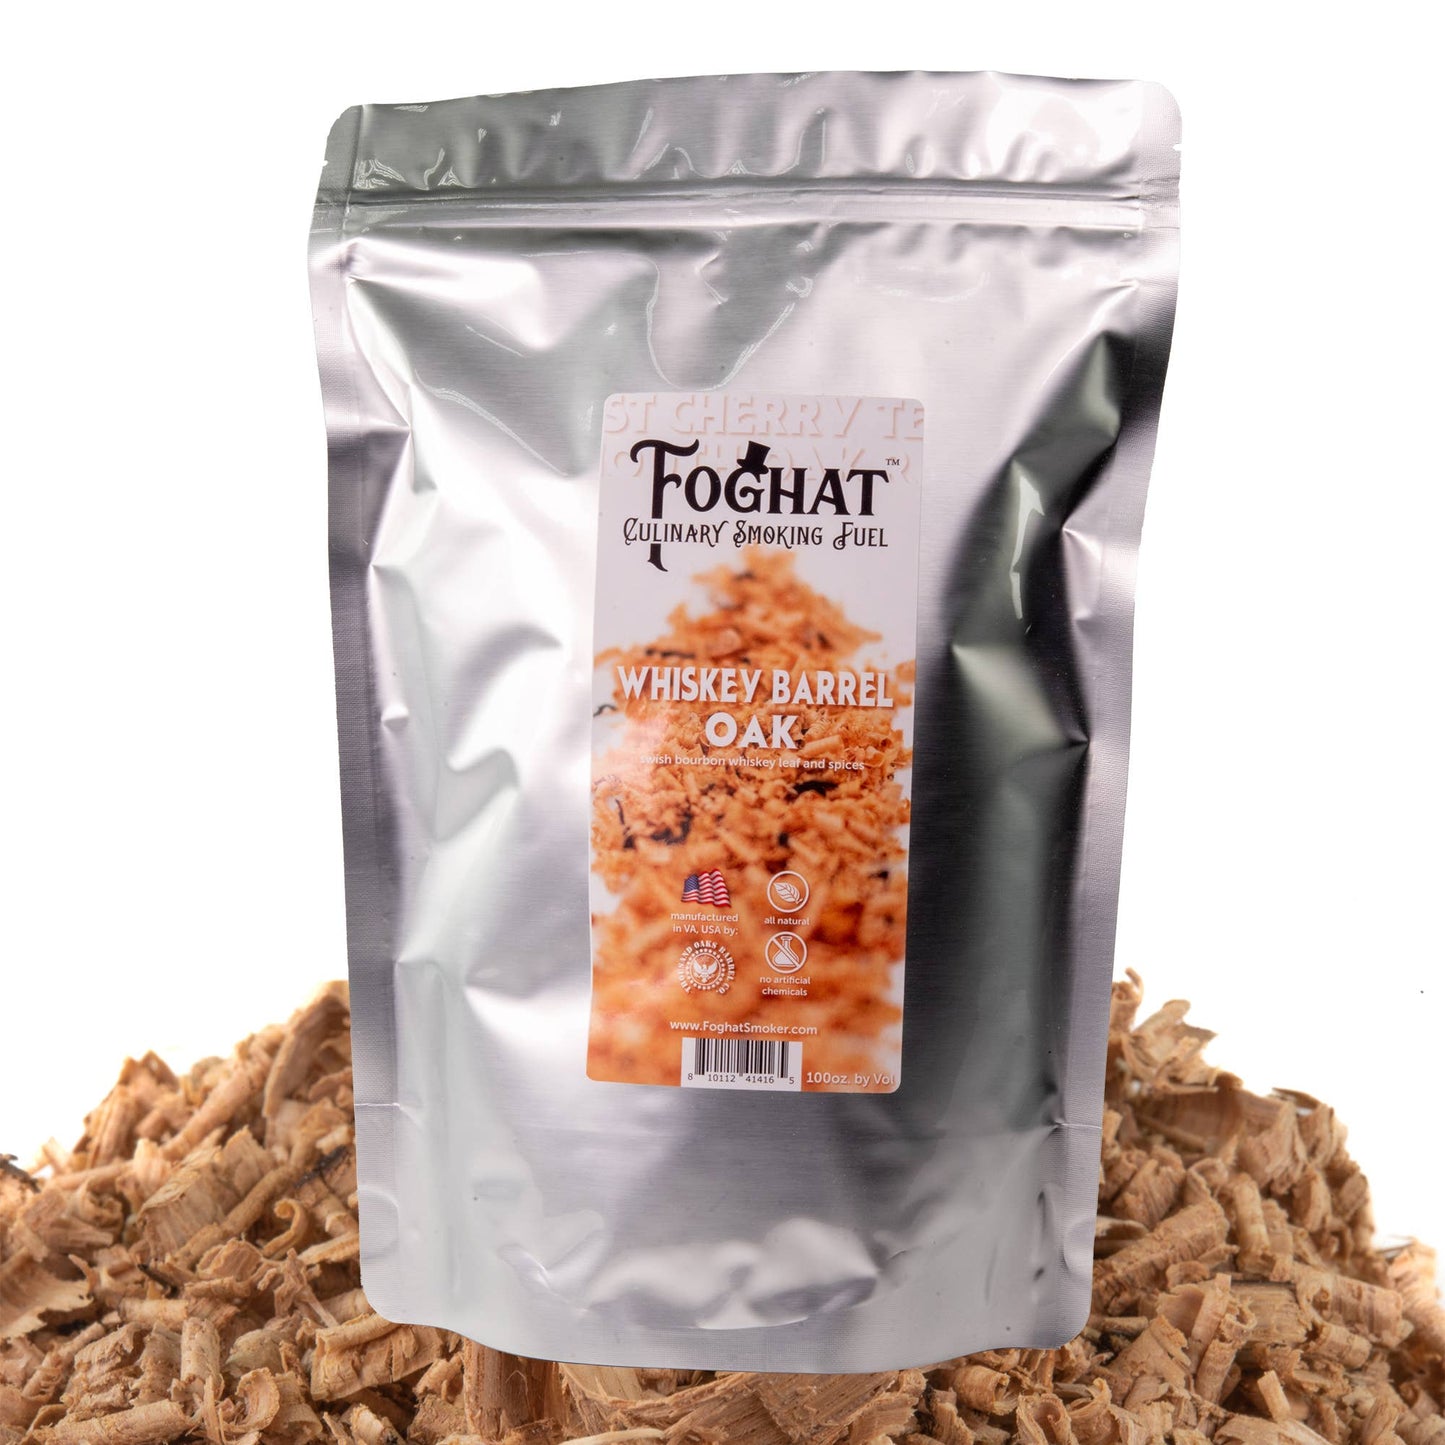 Whiskey Barrel Oak - Foghat Culinary Smoking Fuel - The Tool Store